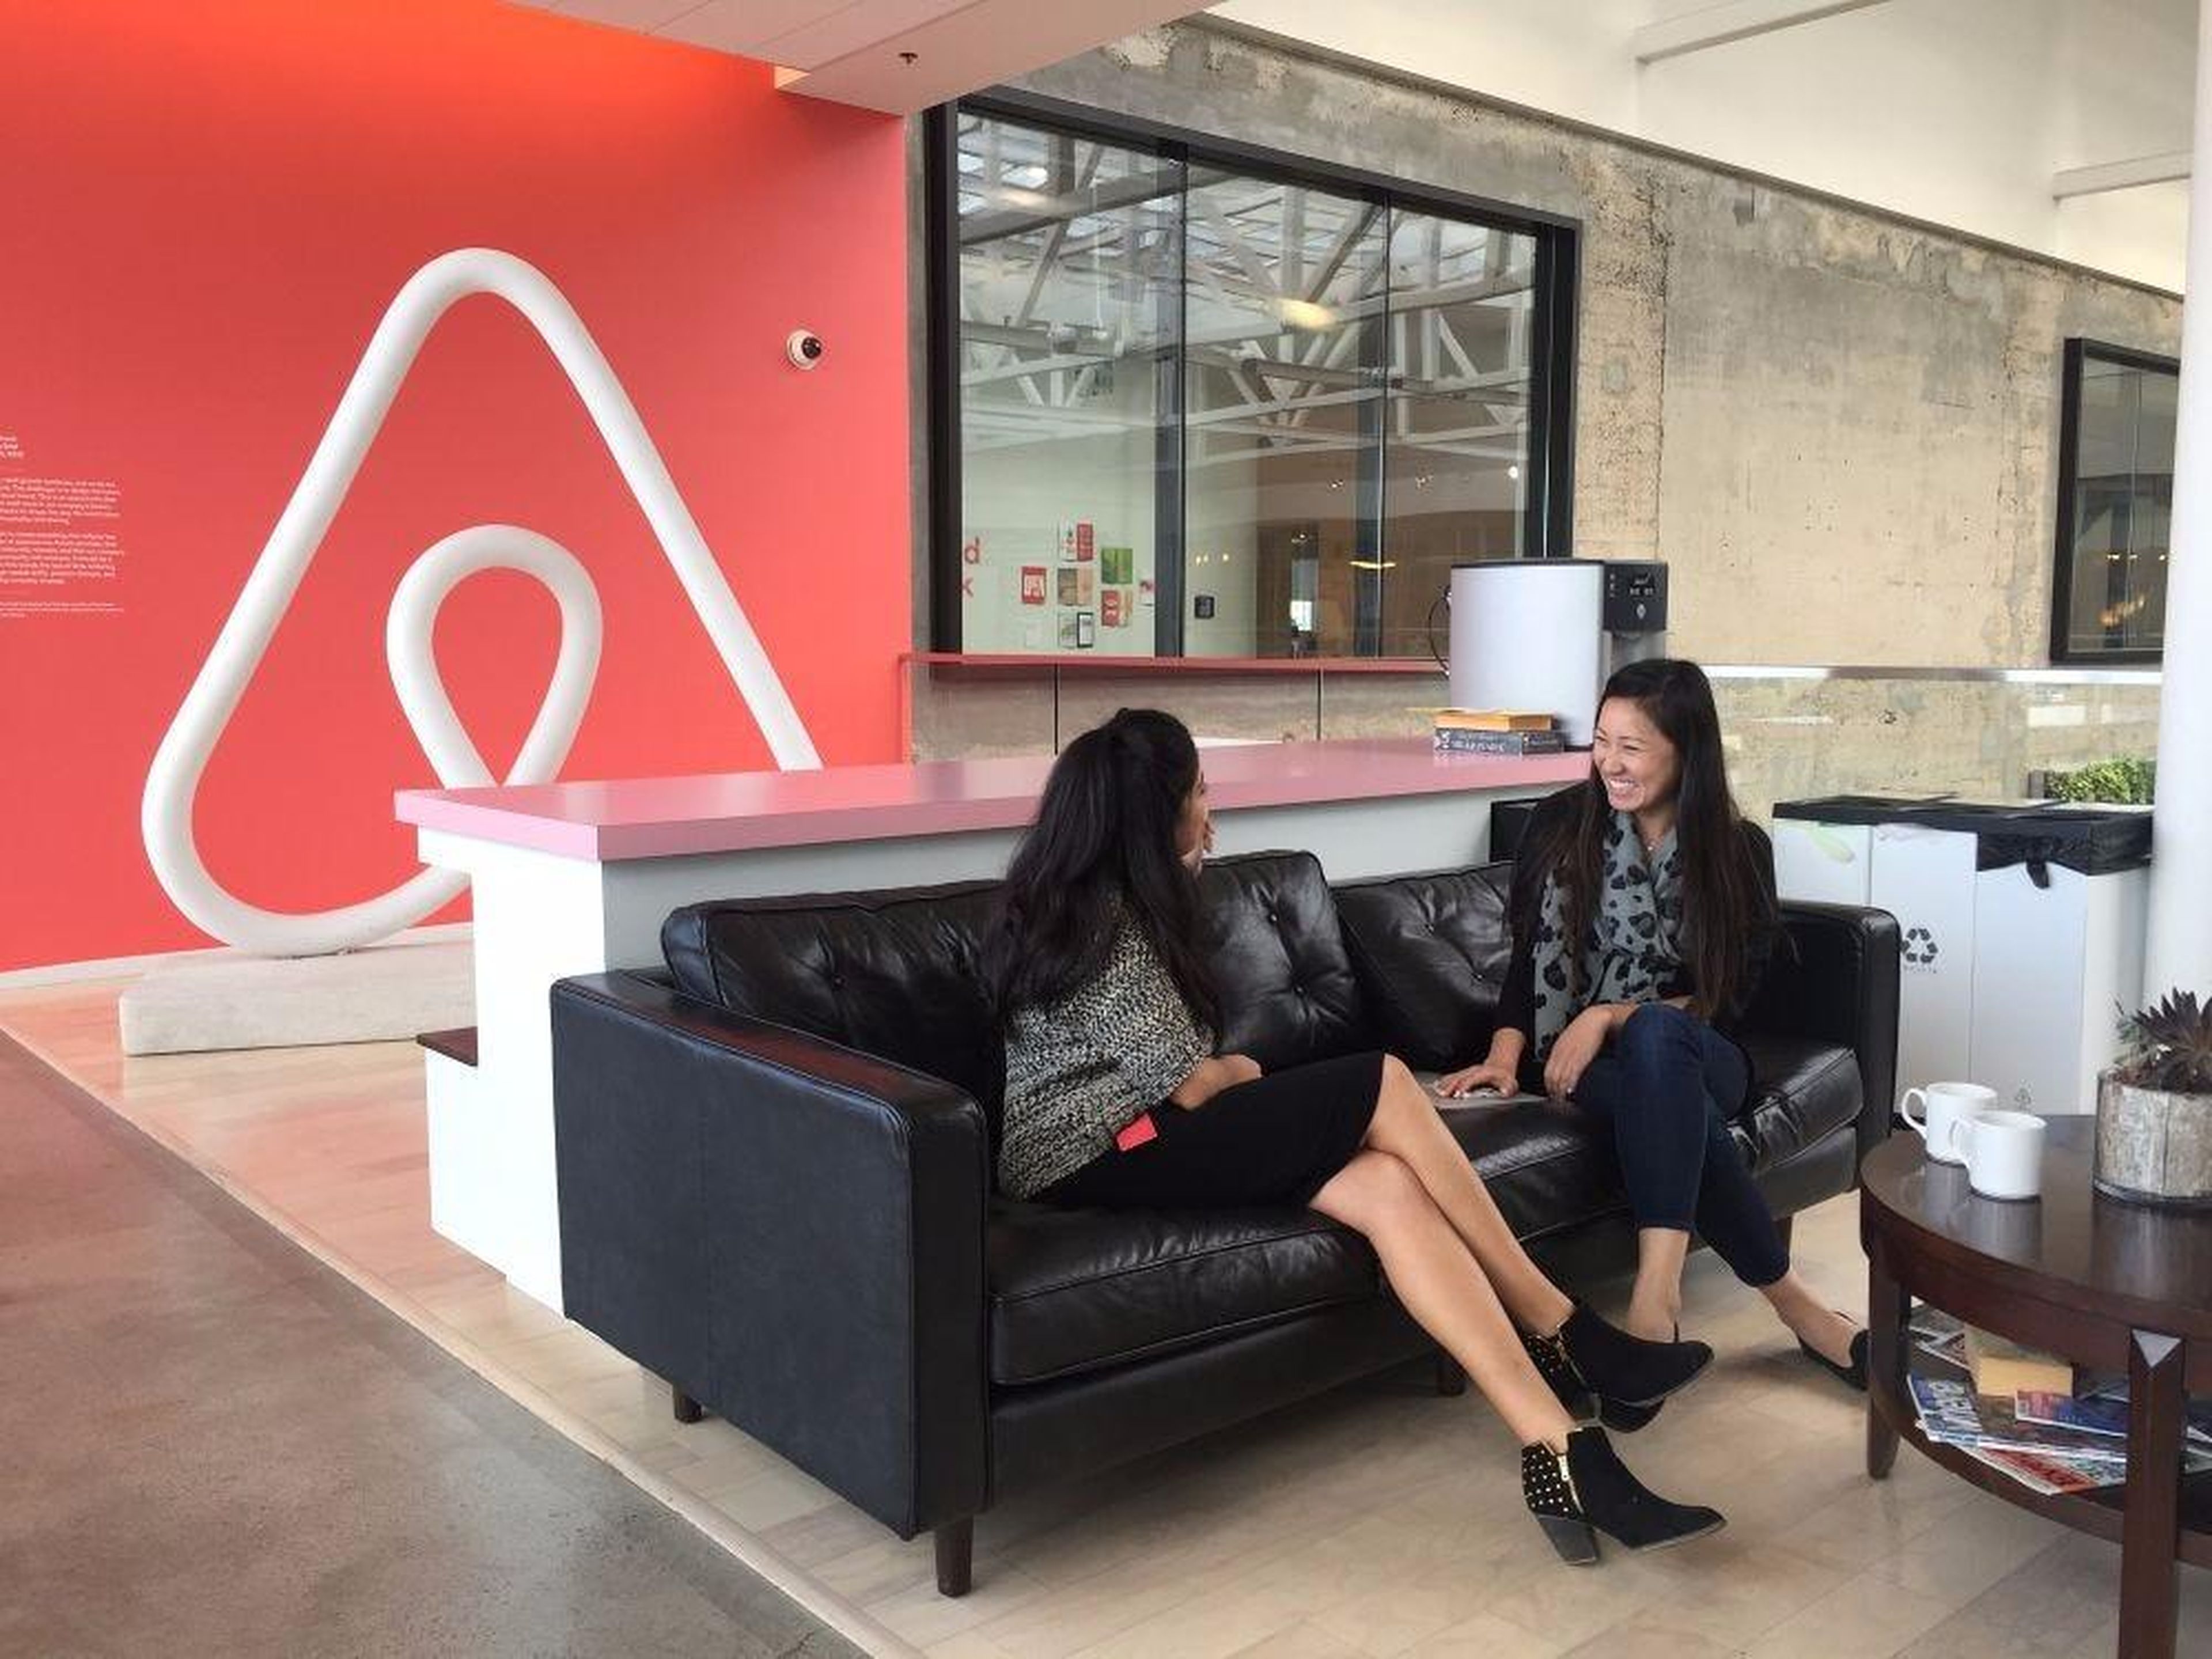 Airbnb employees